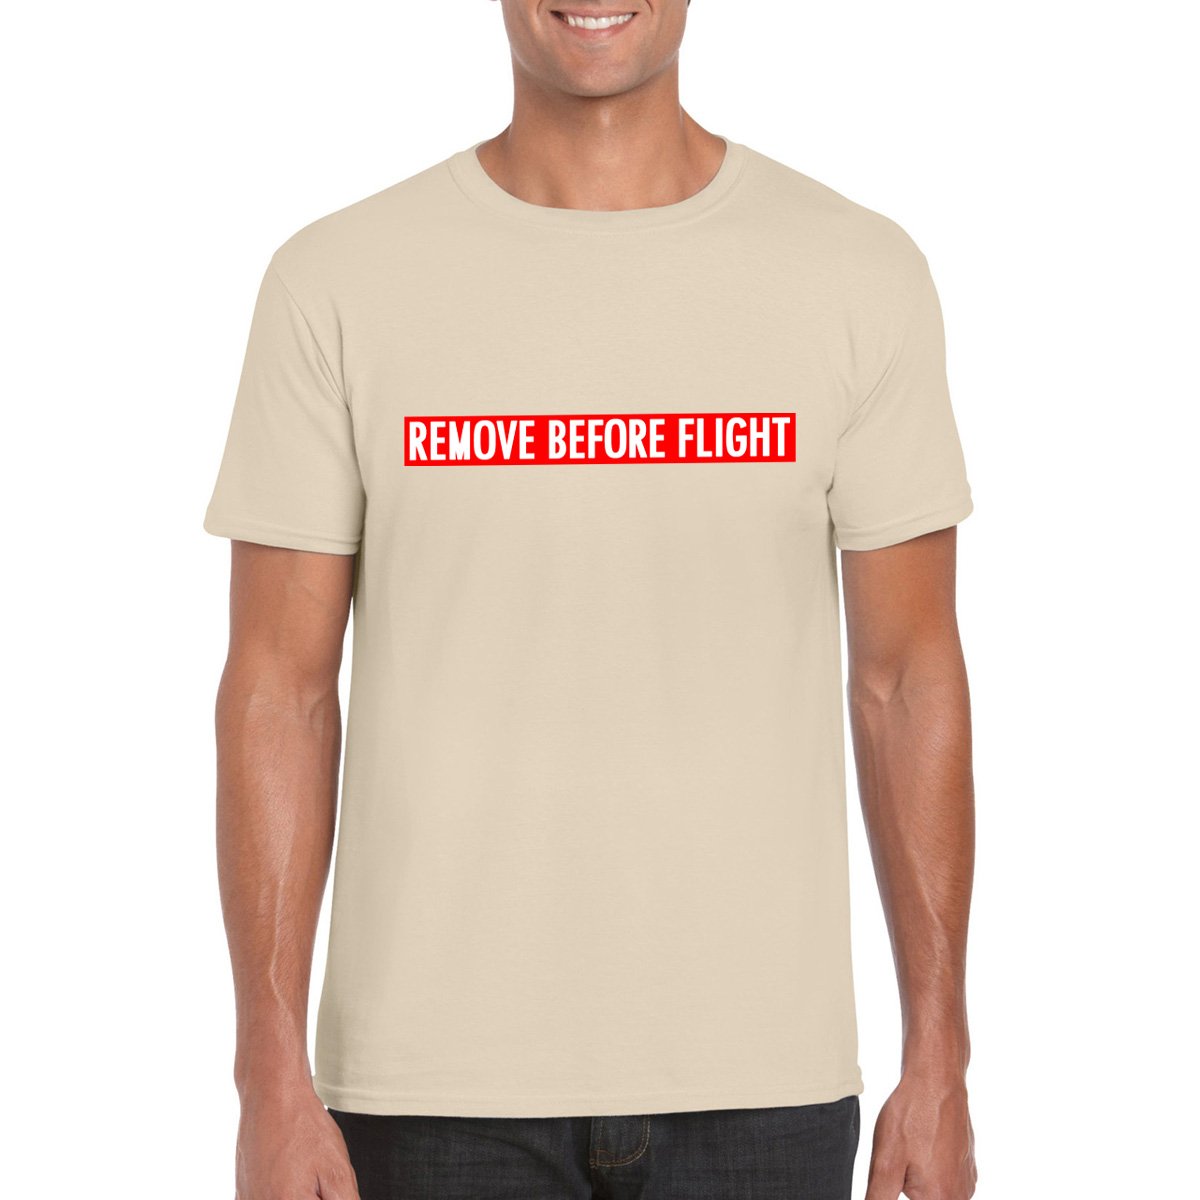 REMOVE BEFORE FLIGHT Unisex Semi-Fitted T-Shirt